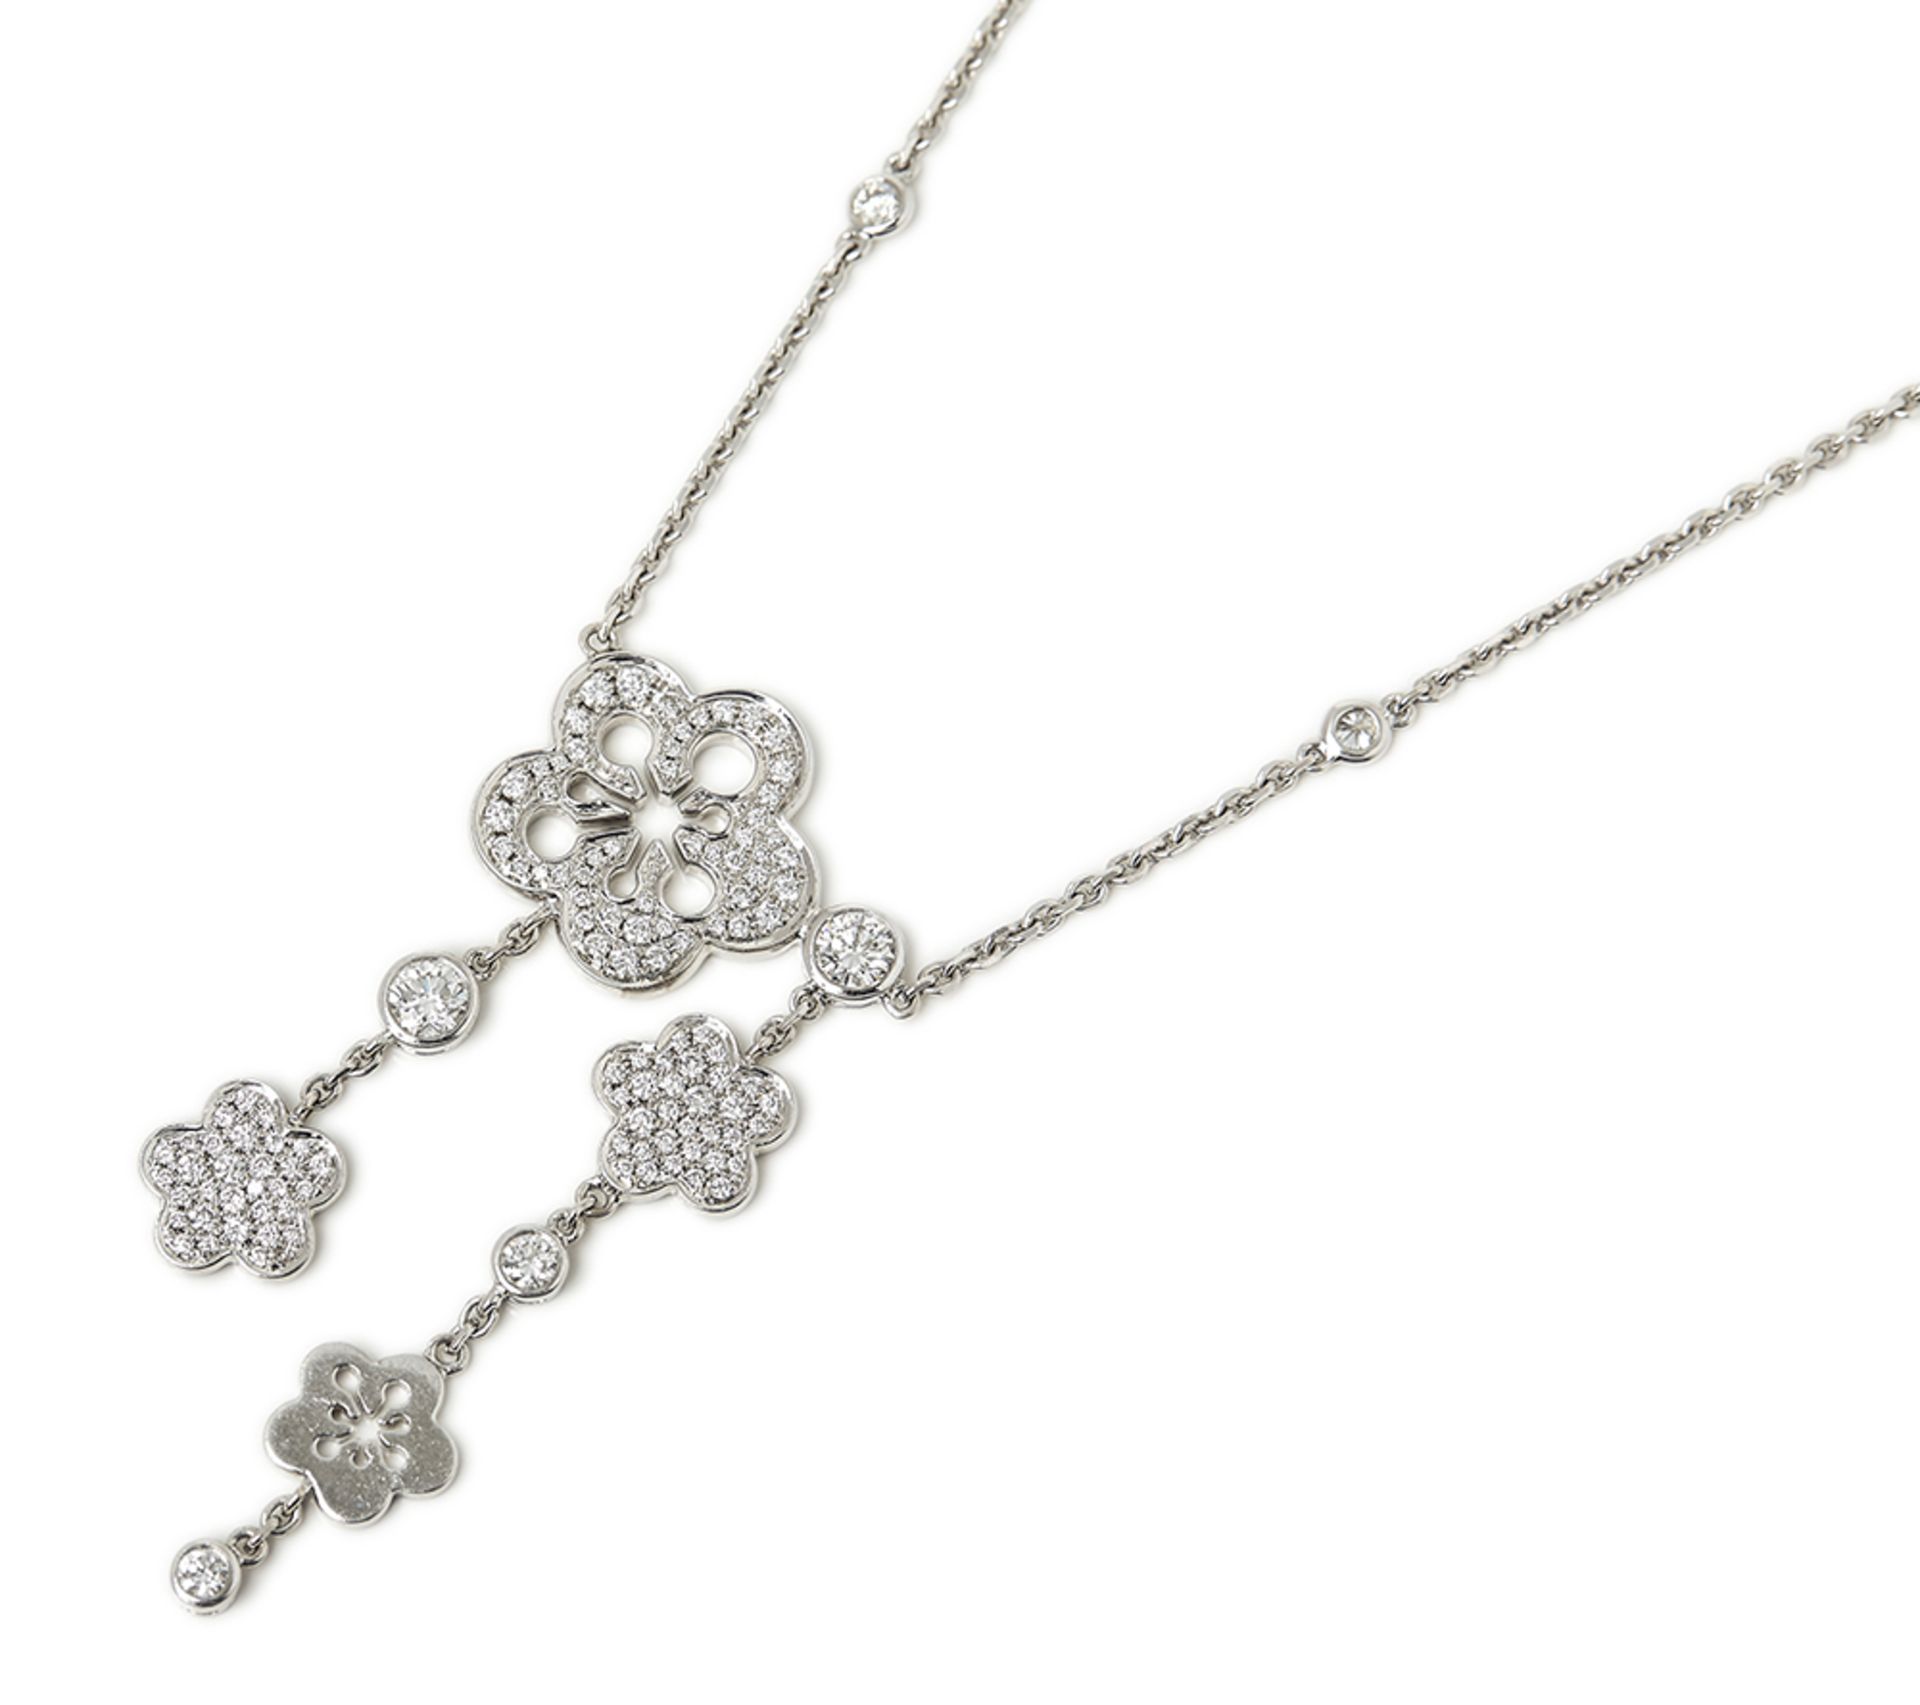 Boodles 18k White Gold Diamond Blossom Necklace - Image 8 of 10